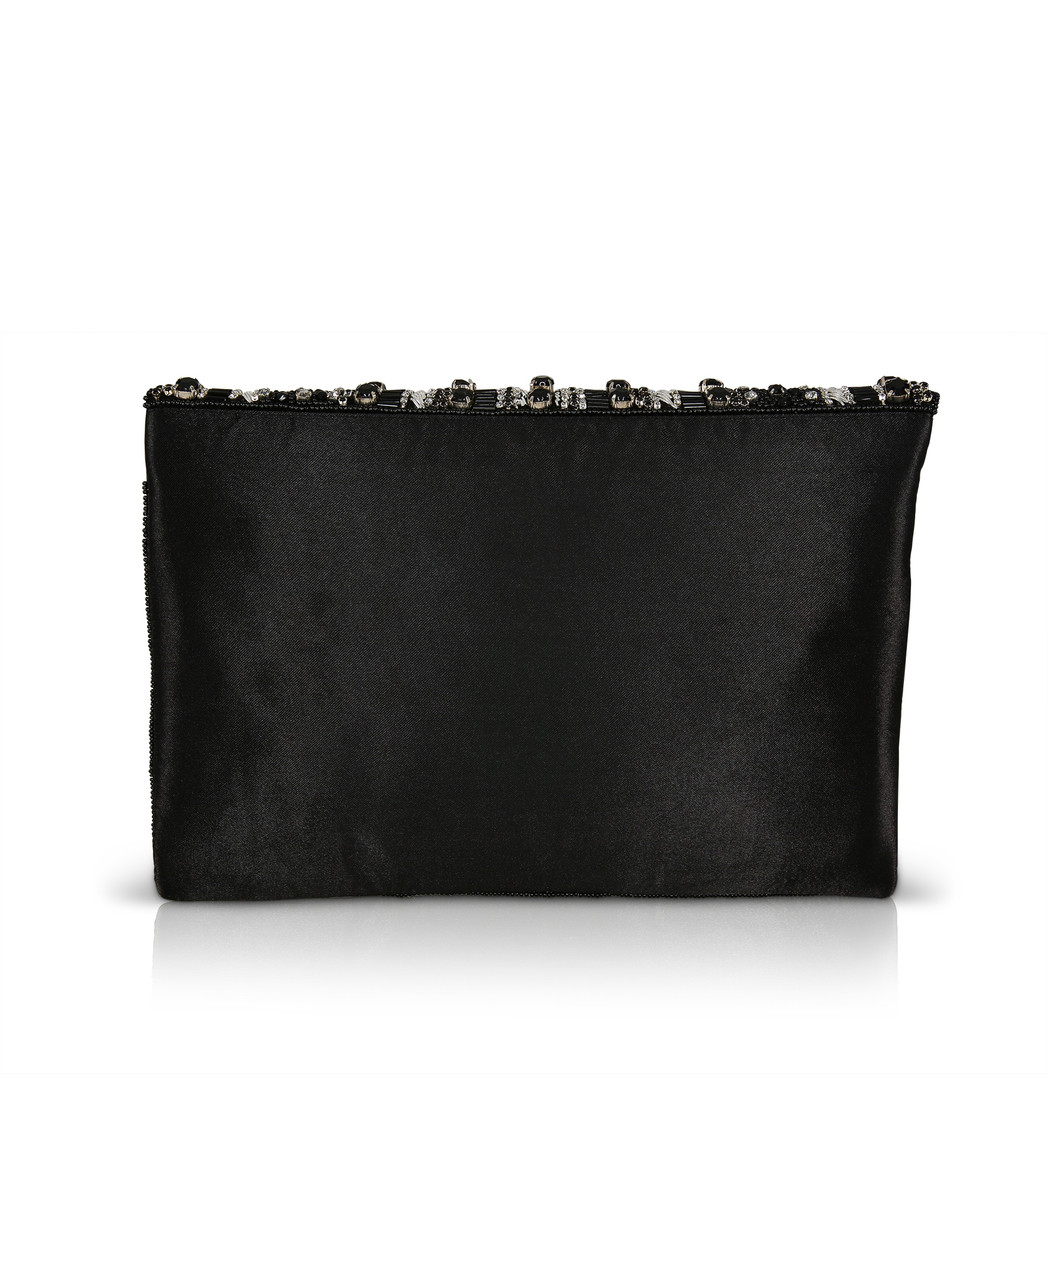 Mia Intricate Beaded Envelope Clutch